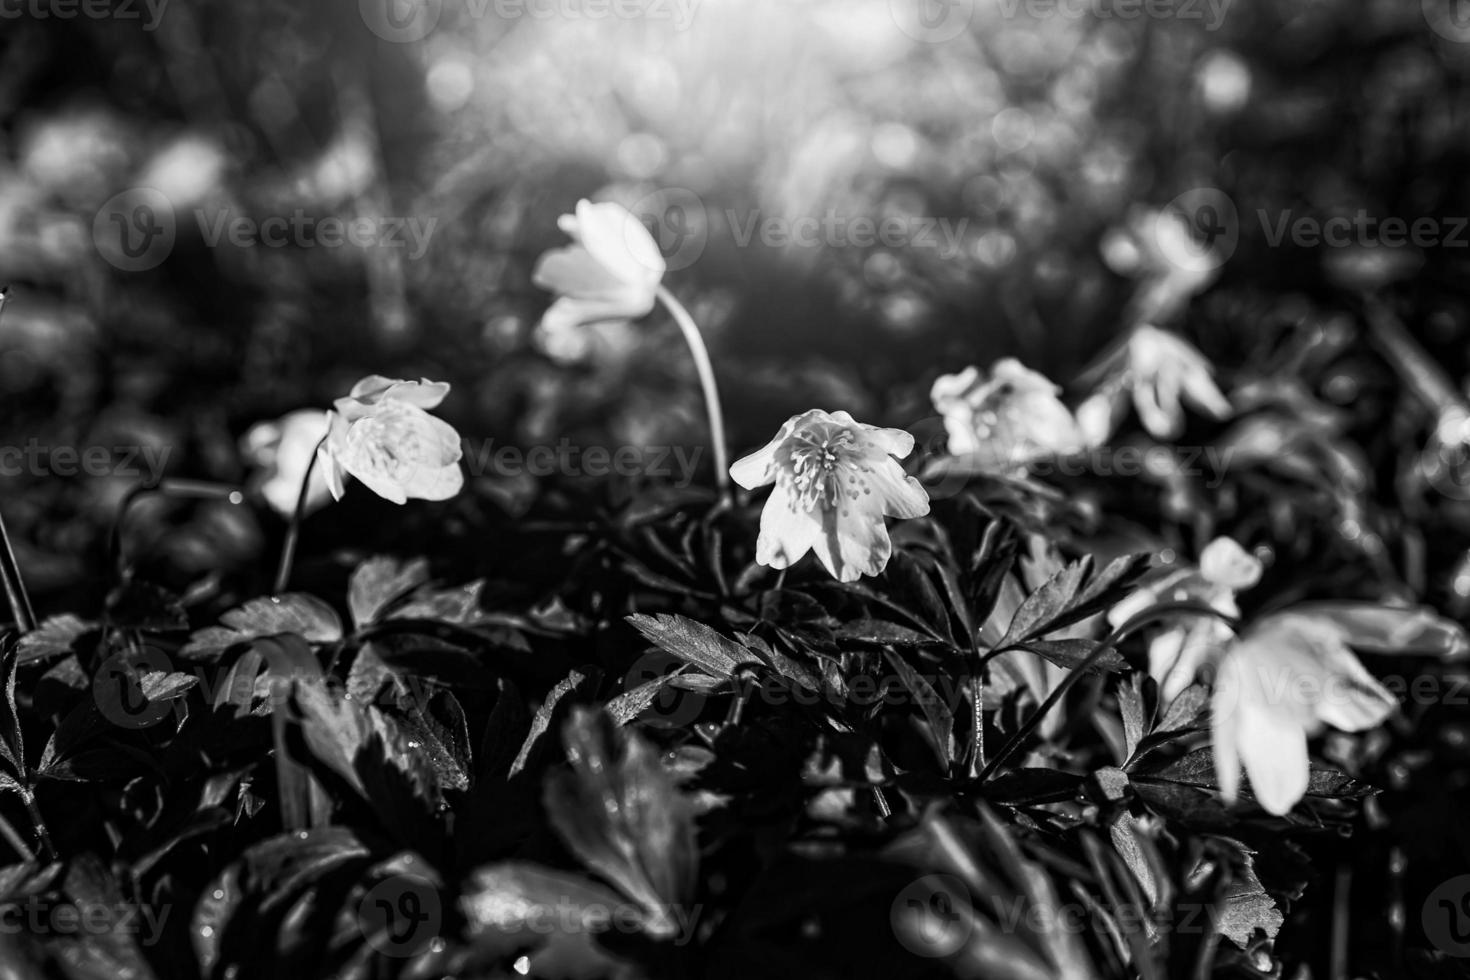 delicate white anemones among green leaves on a warm spring day in the forest photo